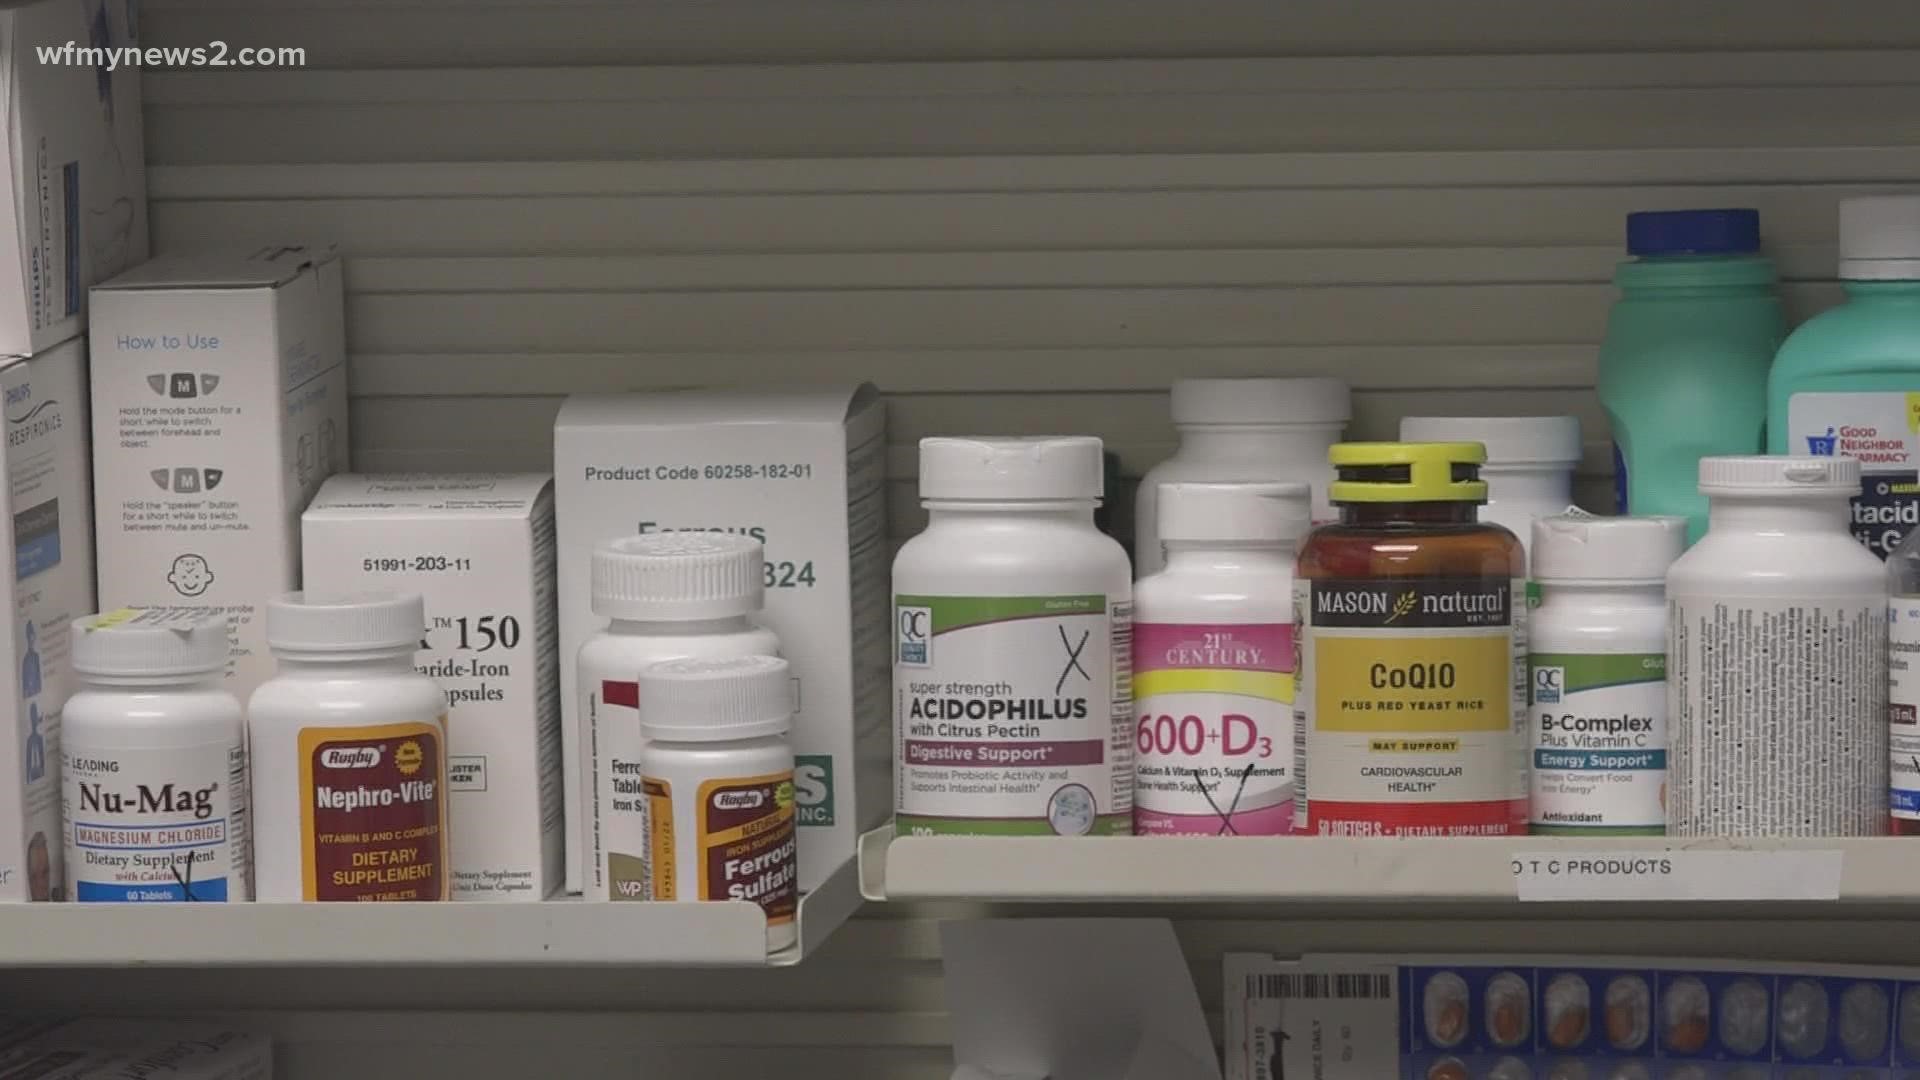 Adler Pharmacy in Greensboro says a number of medications are on back order and prices are higher because of supply chain issues.